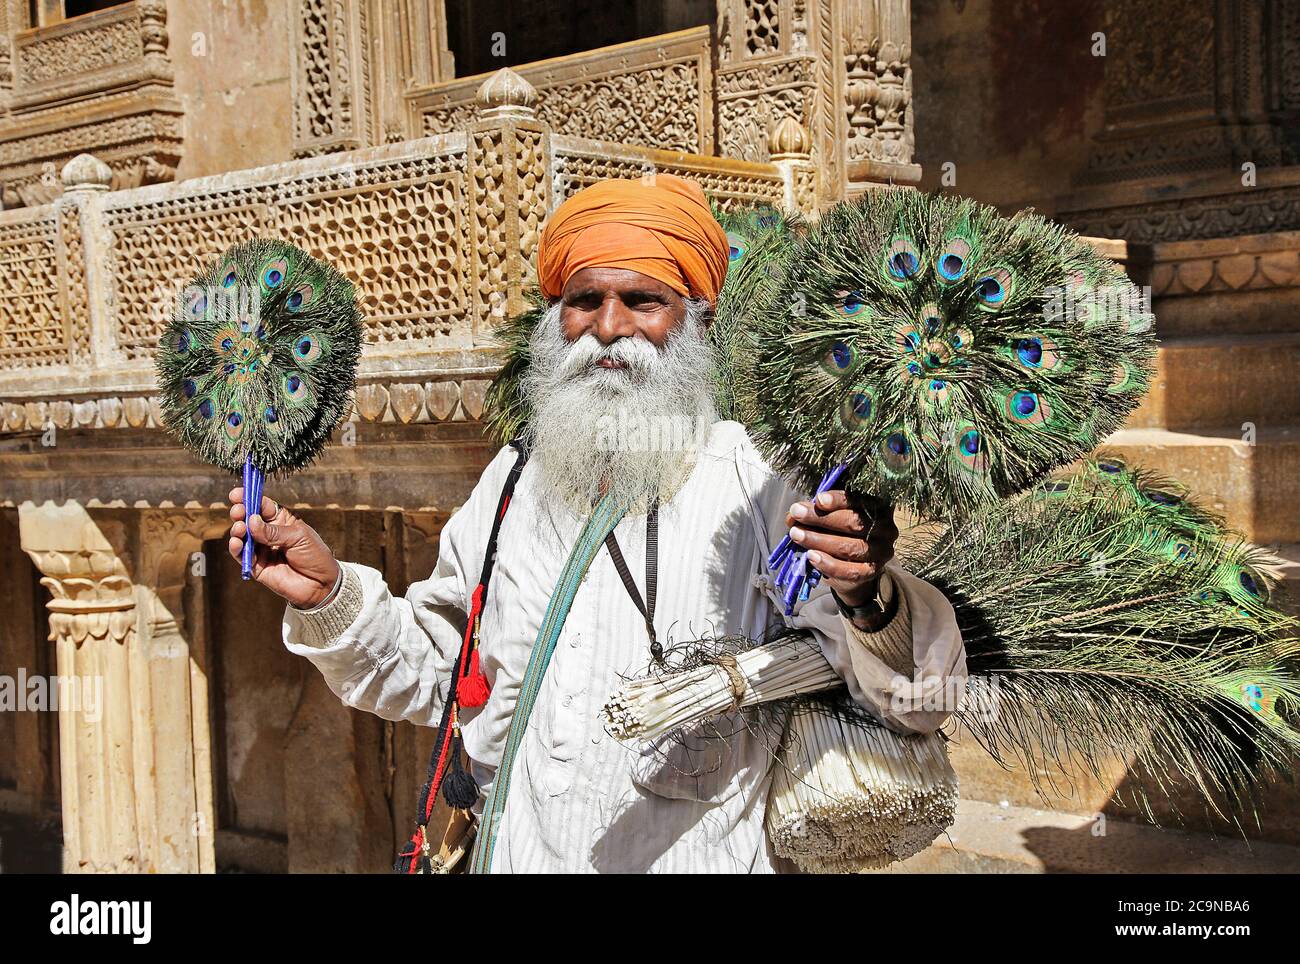 Jaisalmer old city, daily life of indian people.  old man selling peacock feathers. Feb 2013 Rajasthan, India Stock Photo